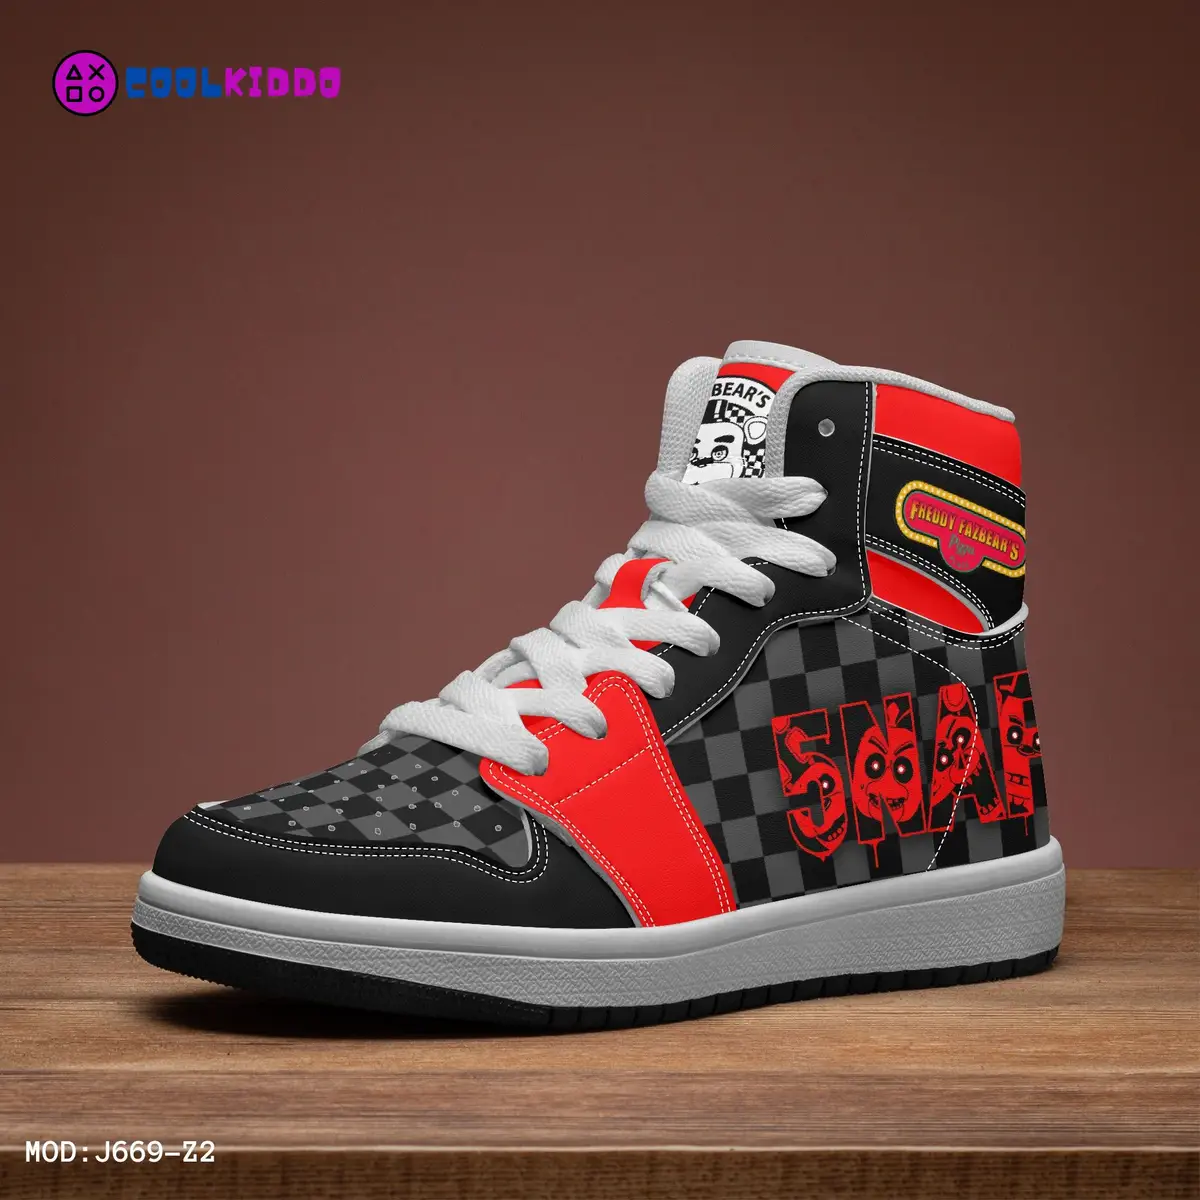 Five Nights at Freddy’s Inspired Character High-Top Kids Black and Red Leather Shoes, FNAF Jordans Style Sneakers Cool Kiddo 14